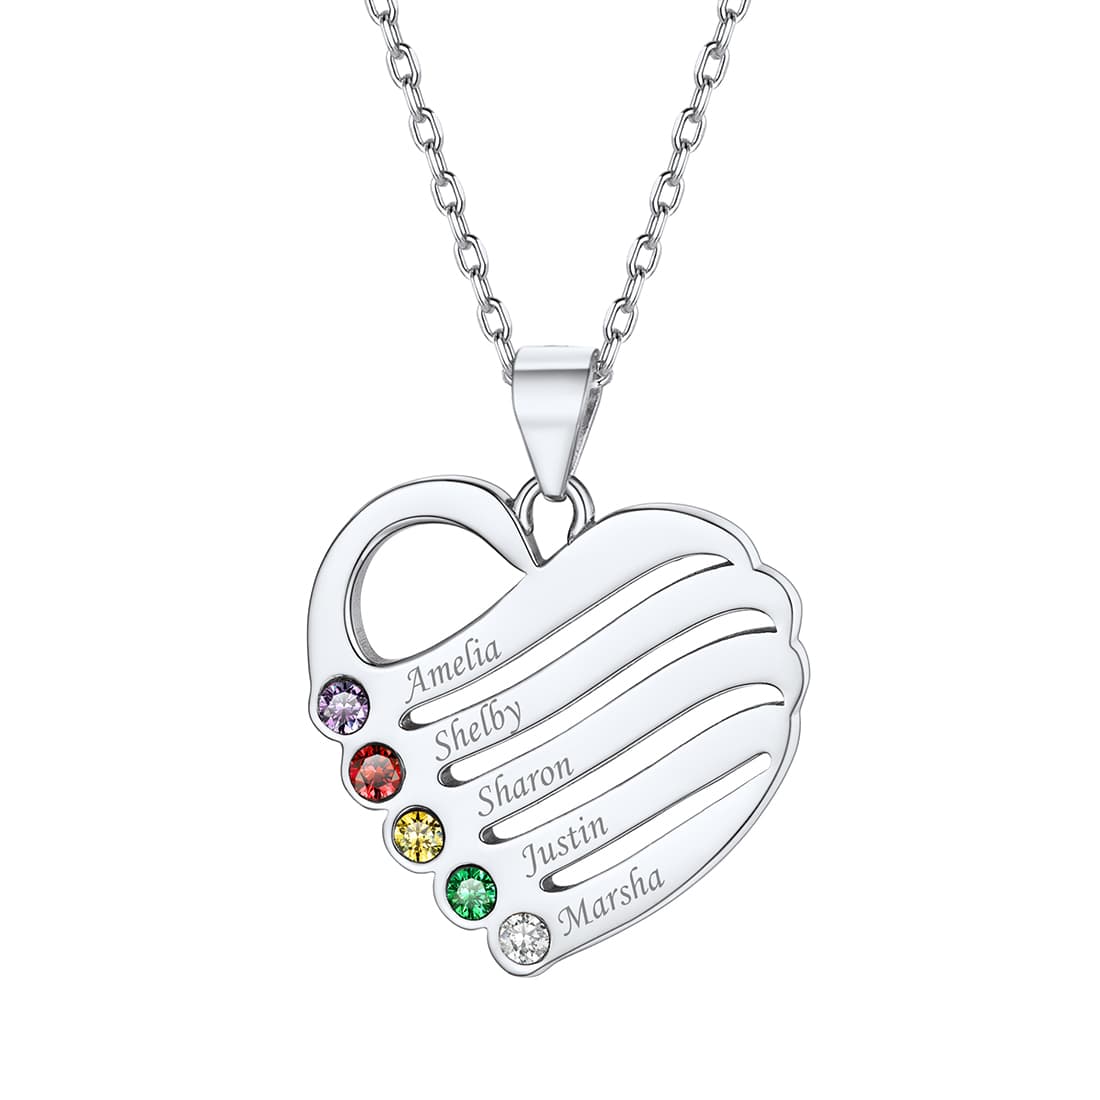 Birthstonesjewelry Sterling Silver Custom Heart Necklace With 5 Name